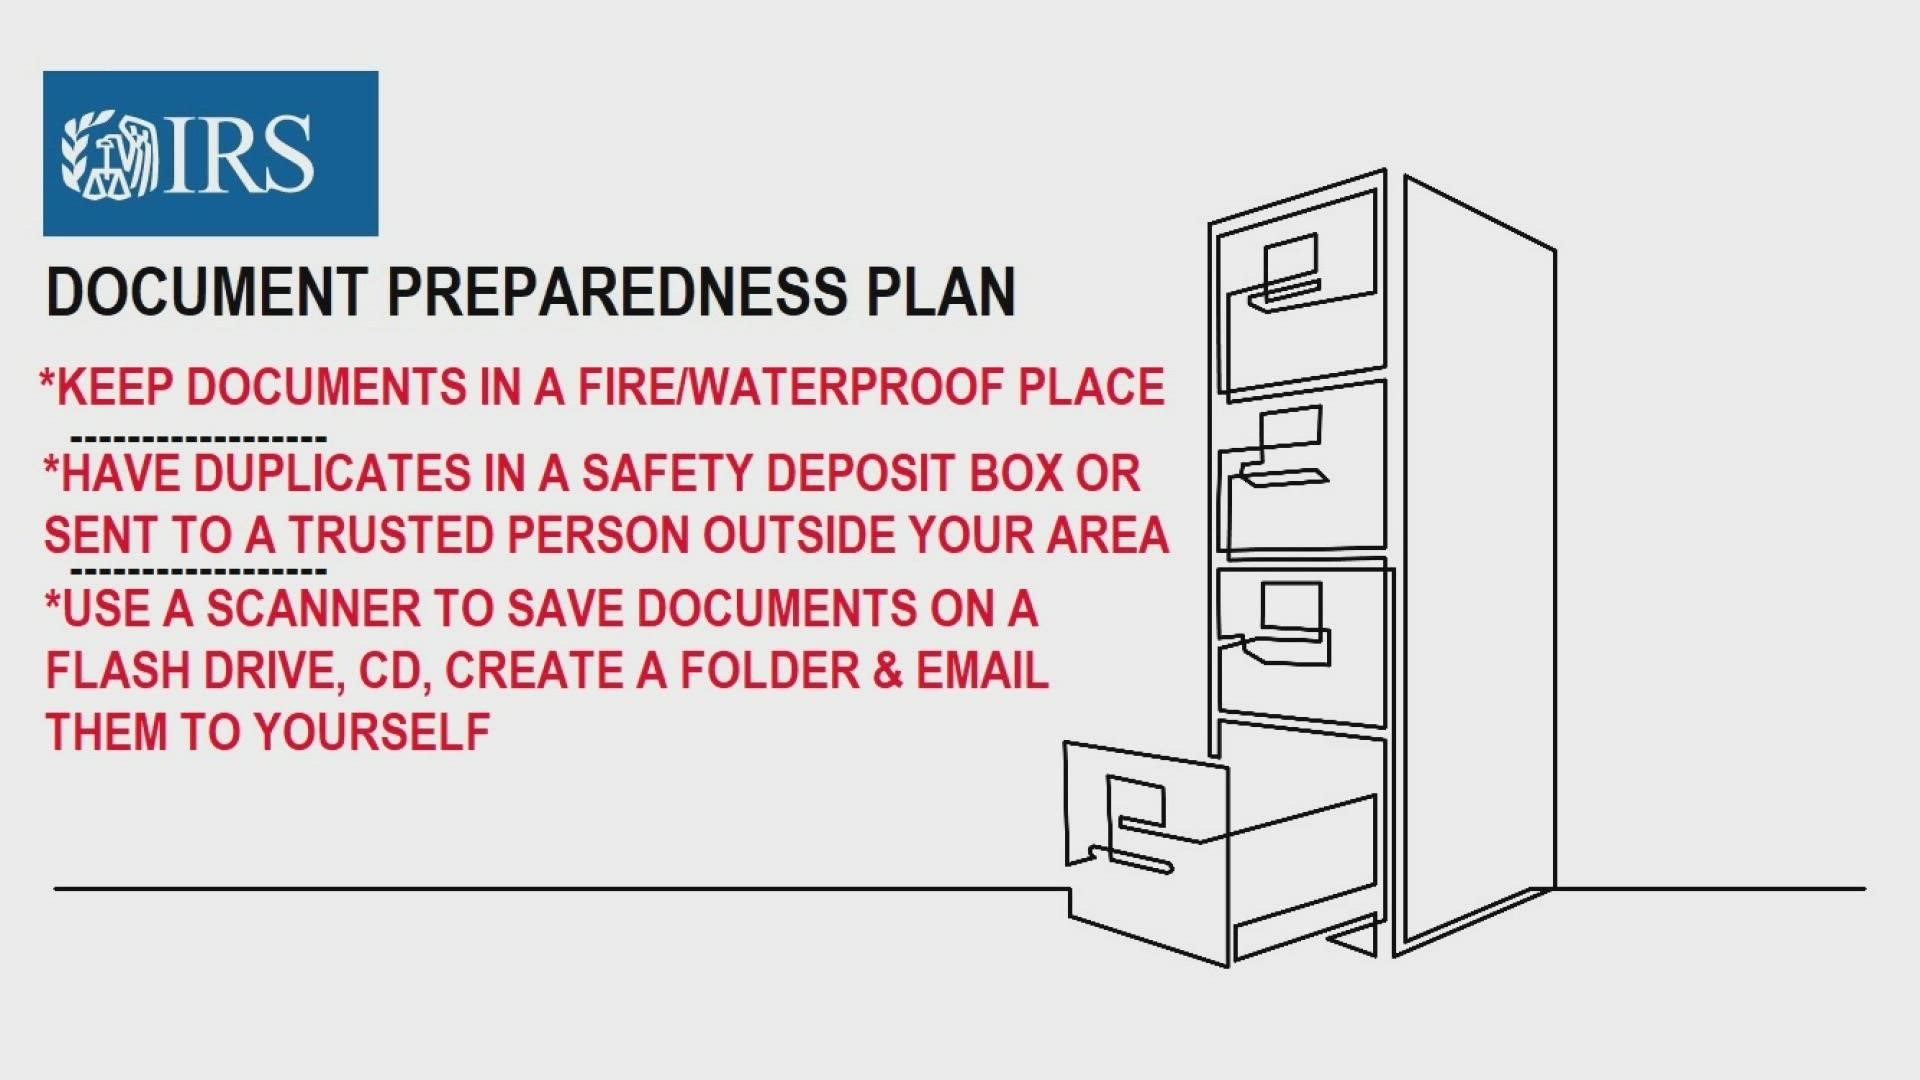 A preparedness plan includes keeping documents in a waterproof place or even better, having duplicates kept in a safety deposit box.